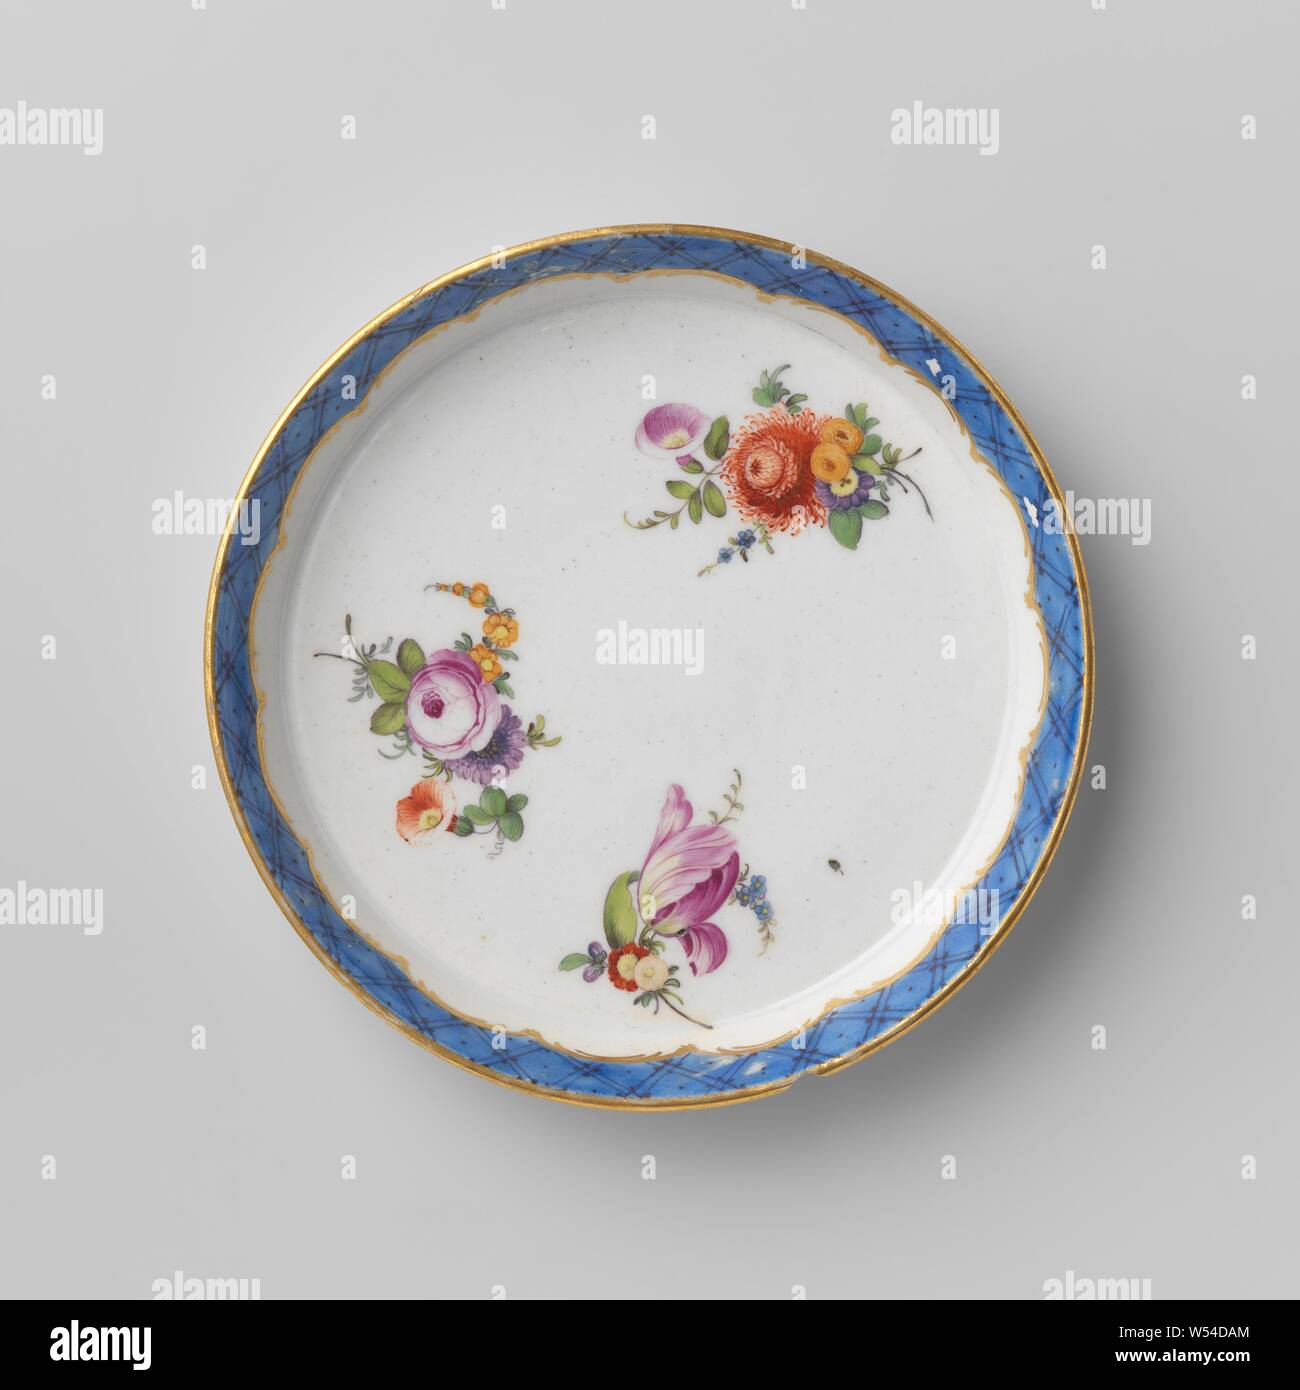 Saucer, painted with three bouquets and napkin, Porcelain saucer, multicolored with three bouquets. Along the edges of the dish blue napkin work between a piping and rocailles in gold. A golden stripe just above the base of the dish., Manufactuur Oud-Loosdrecht, Loosdrecht, c. 1778 - c. 1782, porcelain (material), h 2 cm × d 12.6 cm Stock Photo